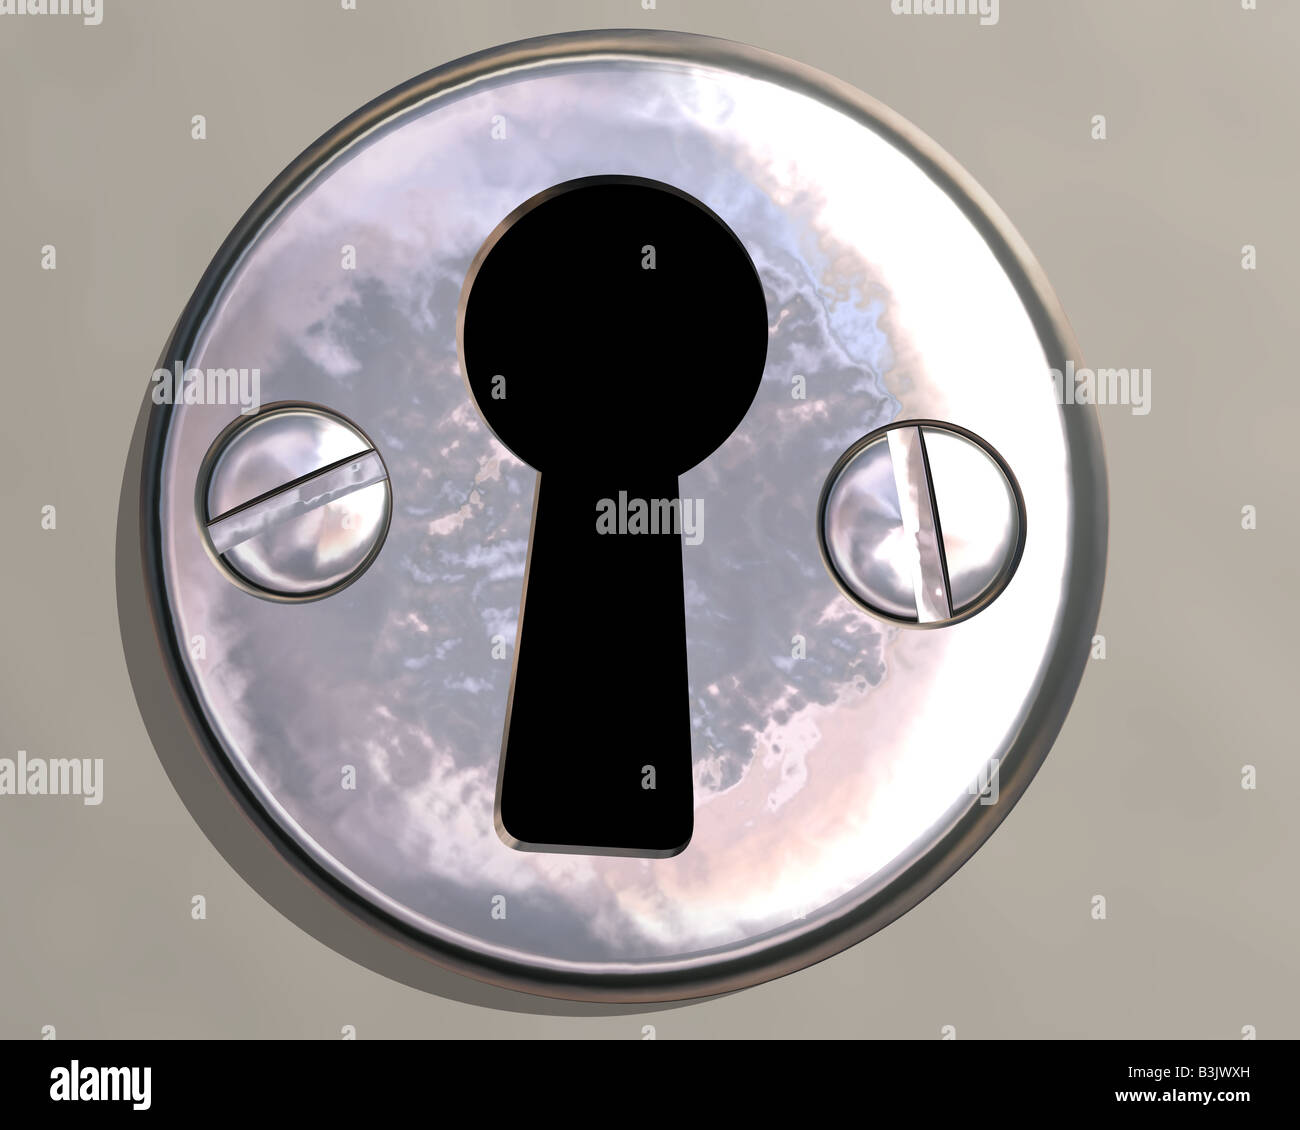 Illustration of a mysterious and innocent looking dark keyhole Stock Photo